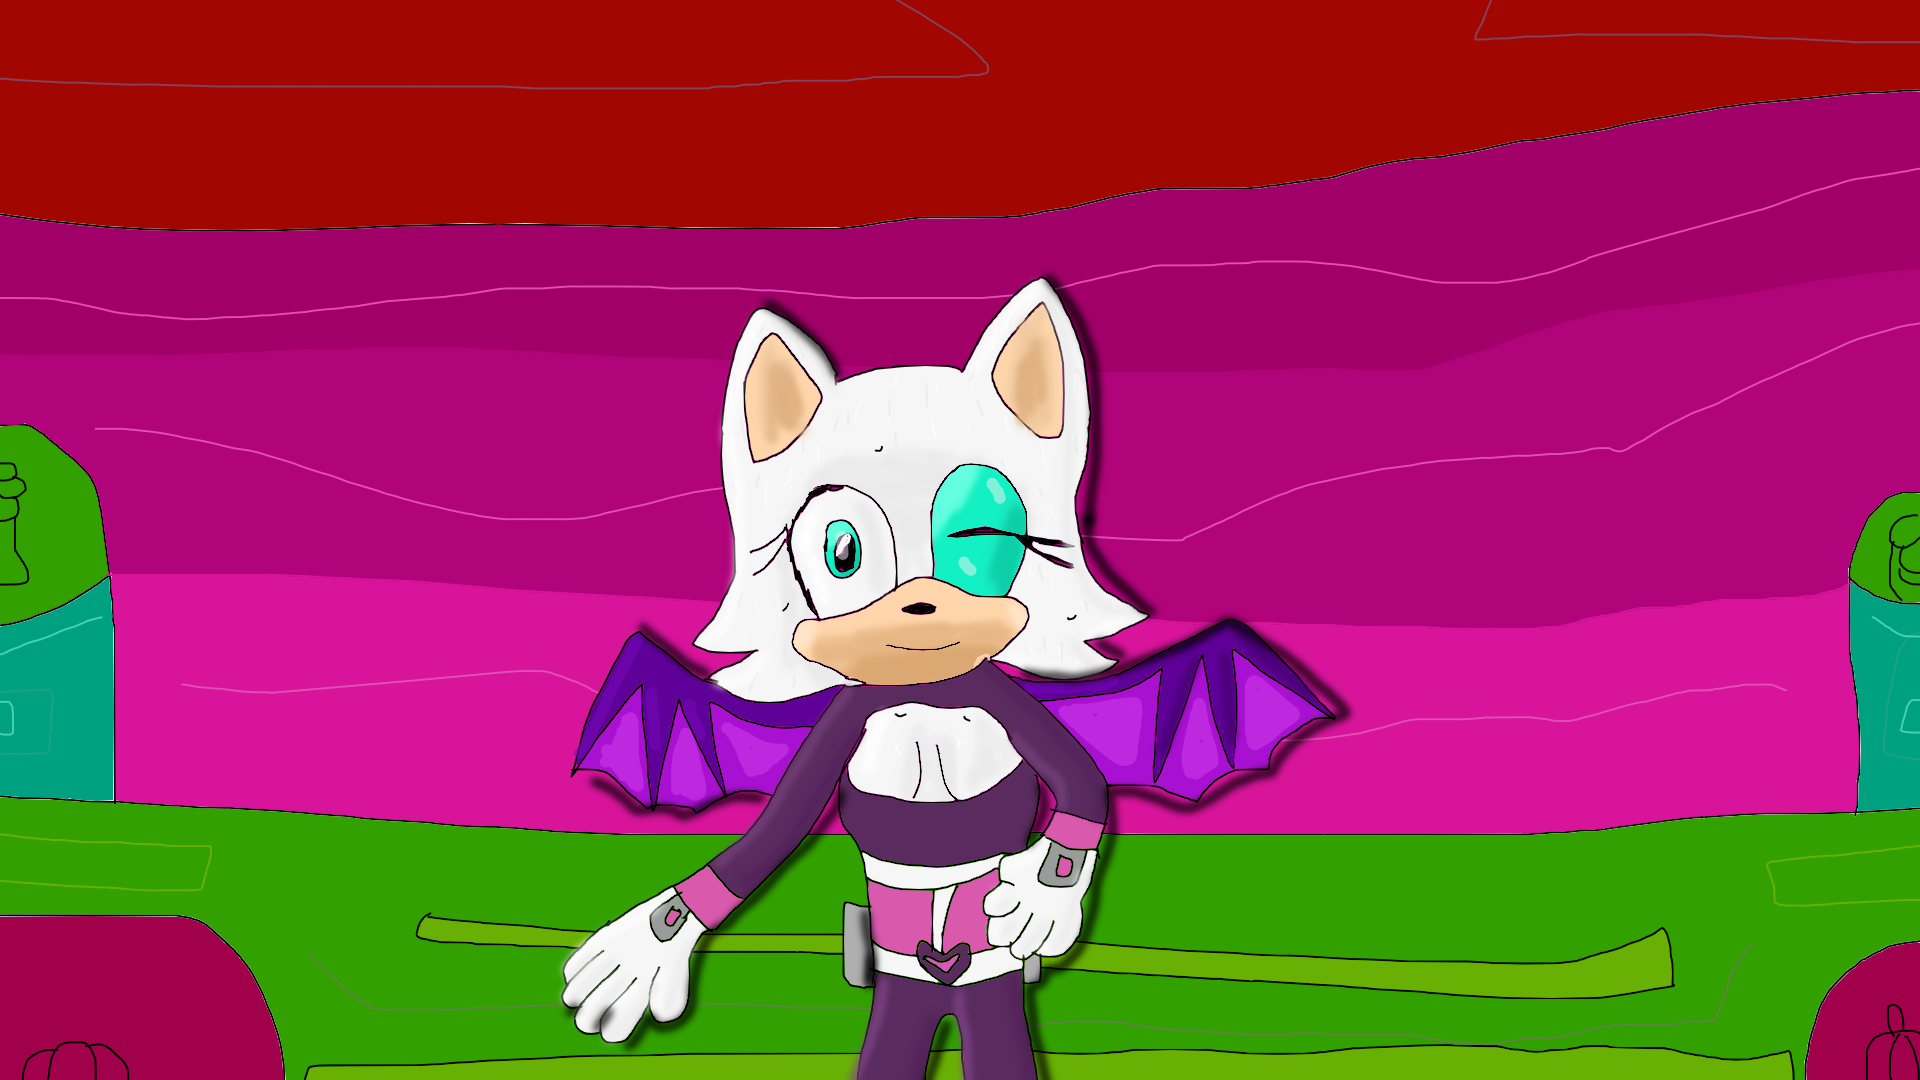 rouge the bat sonic heroes outfit